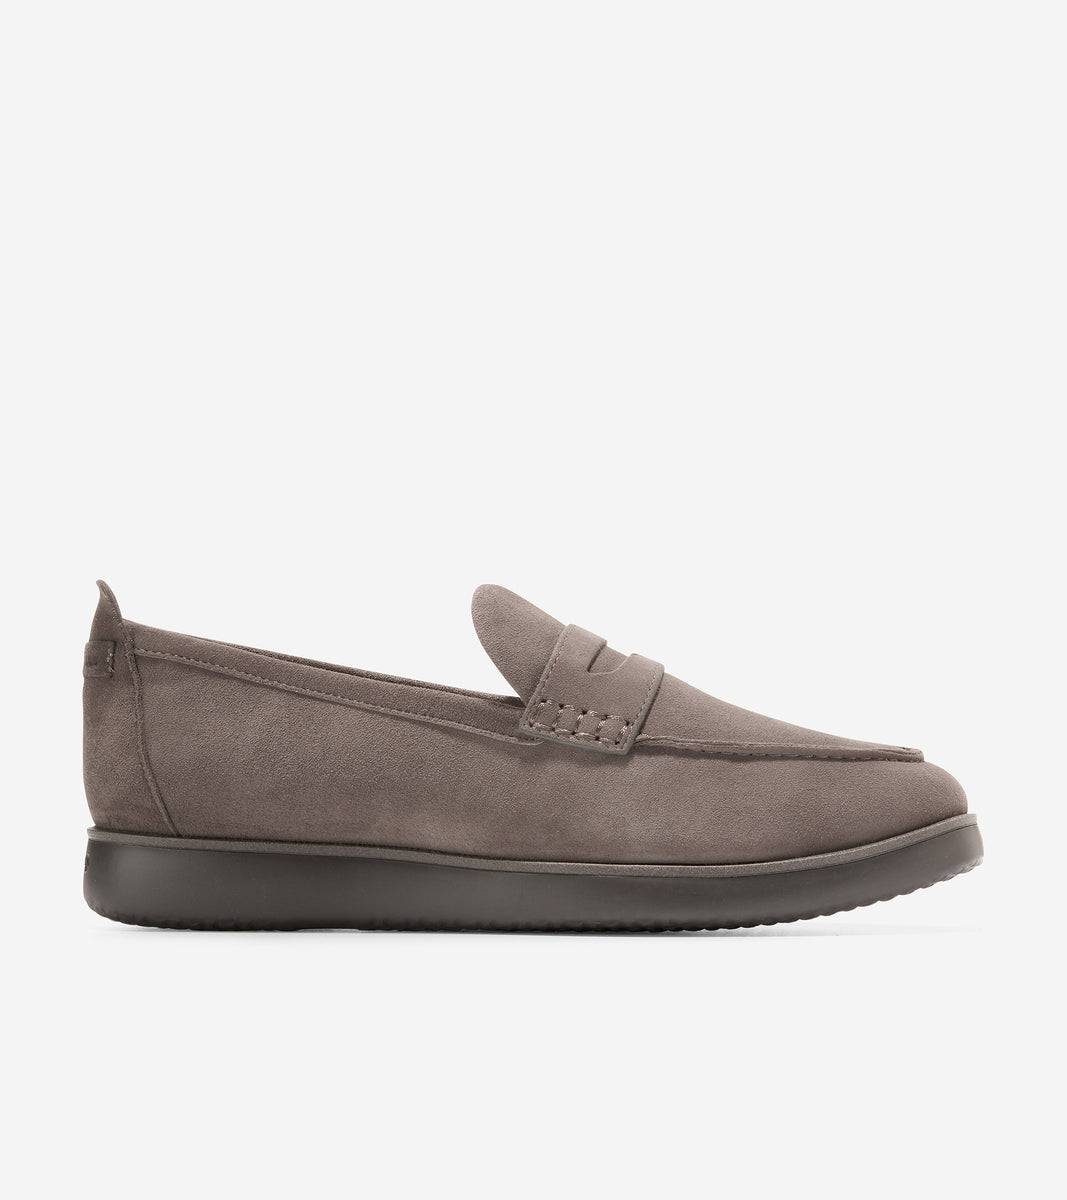 Grand Ambition Tolly Penny Loafer Women's